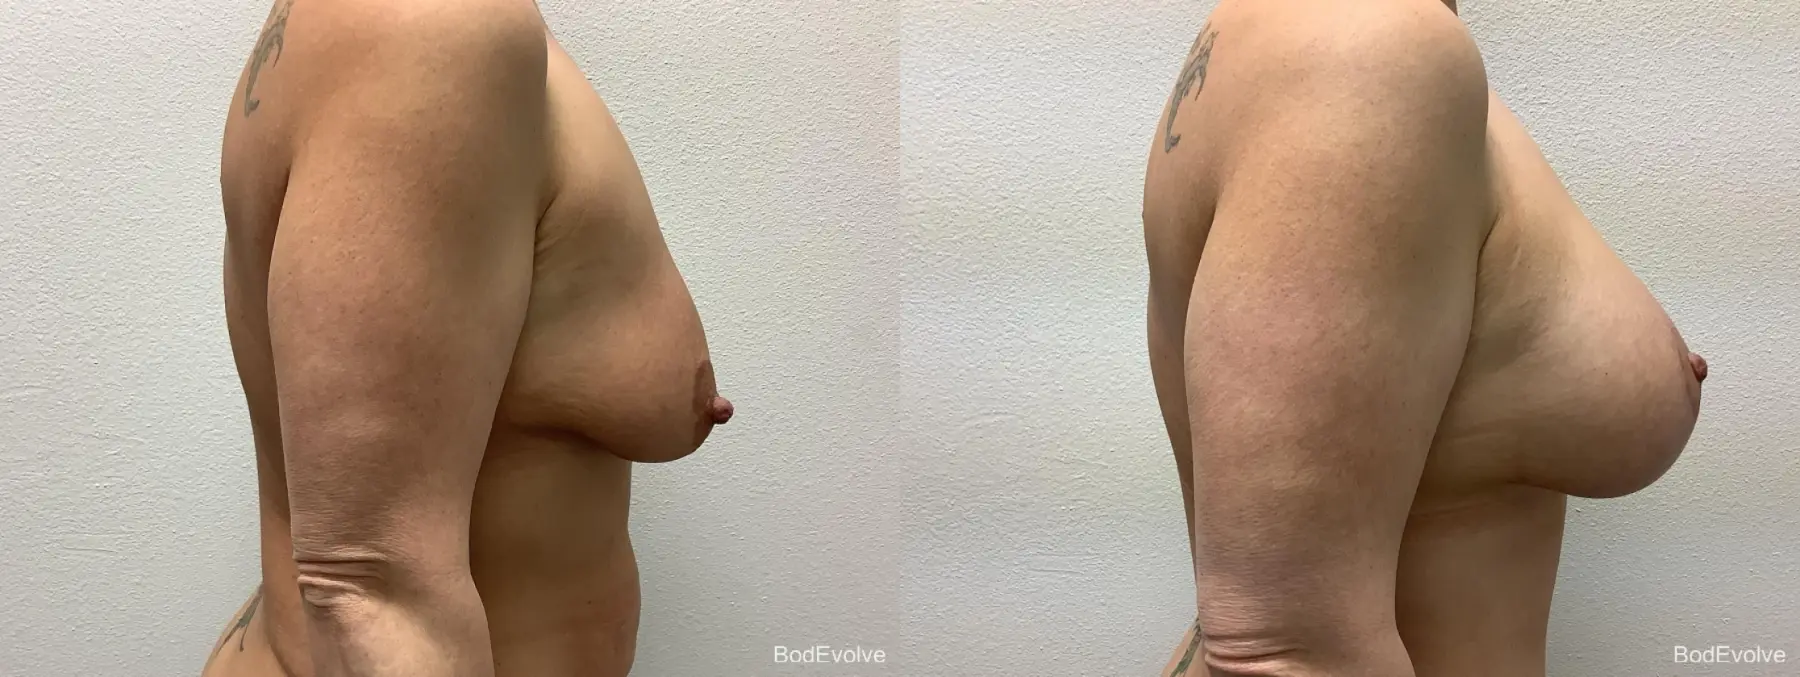 Breast Augmentation With Lift: Patient 1 - Before and After 5